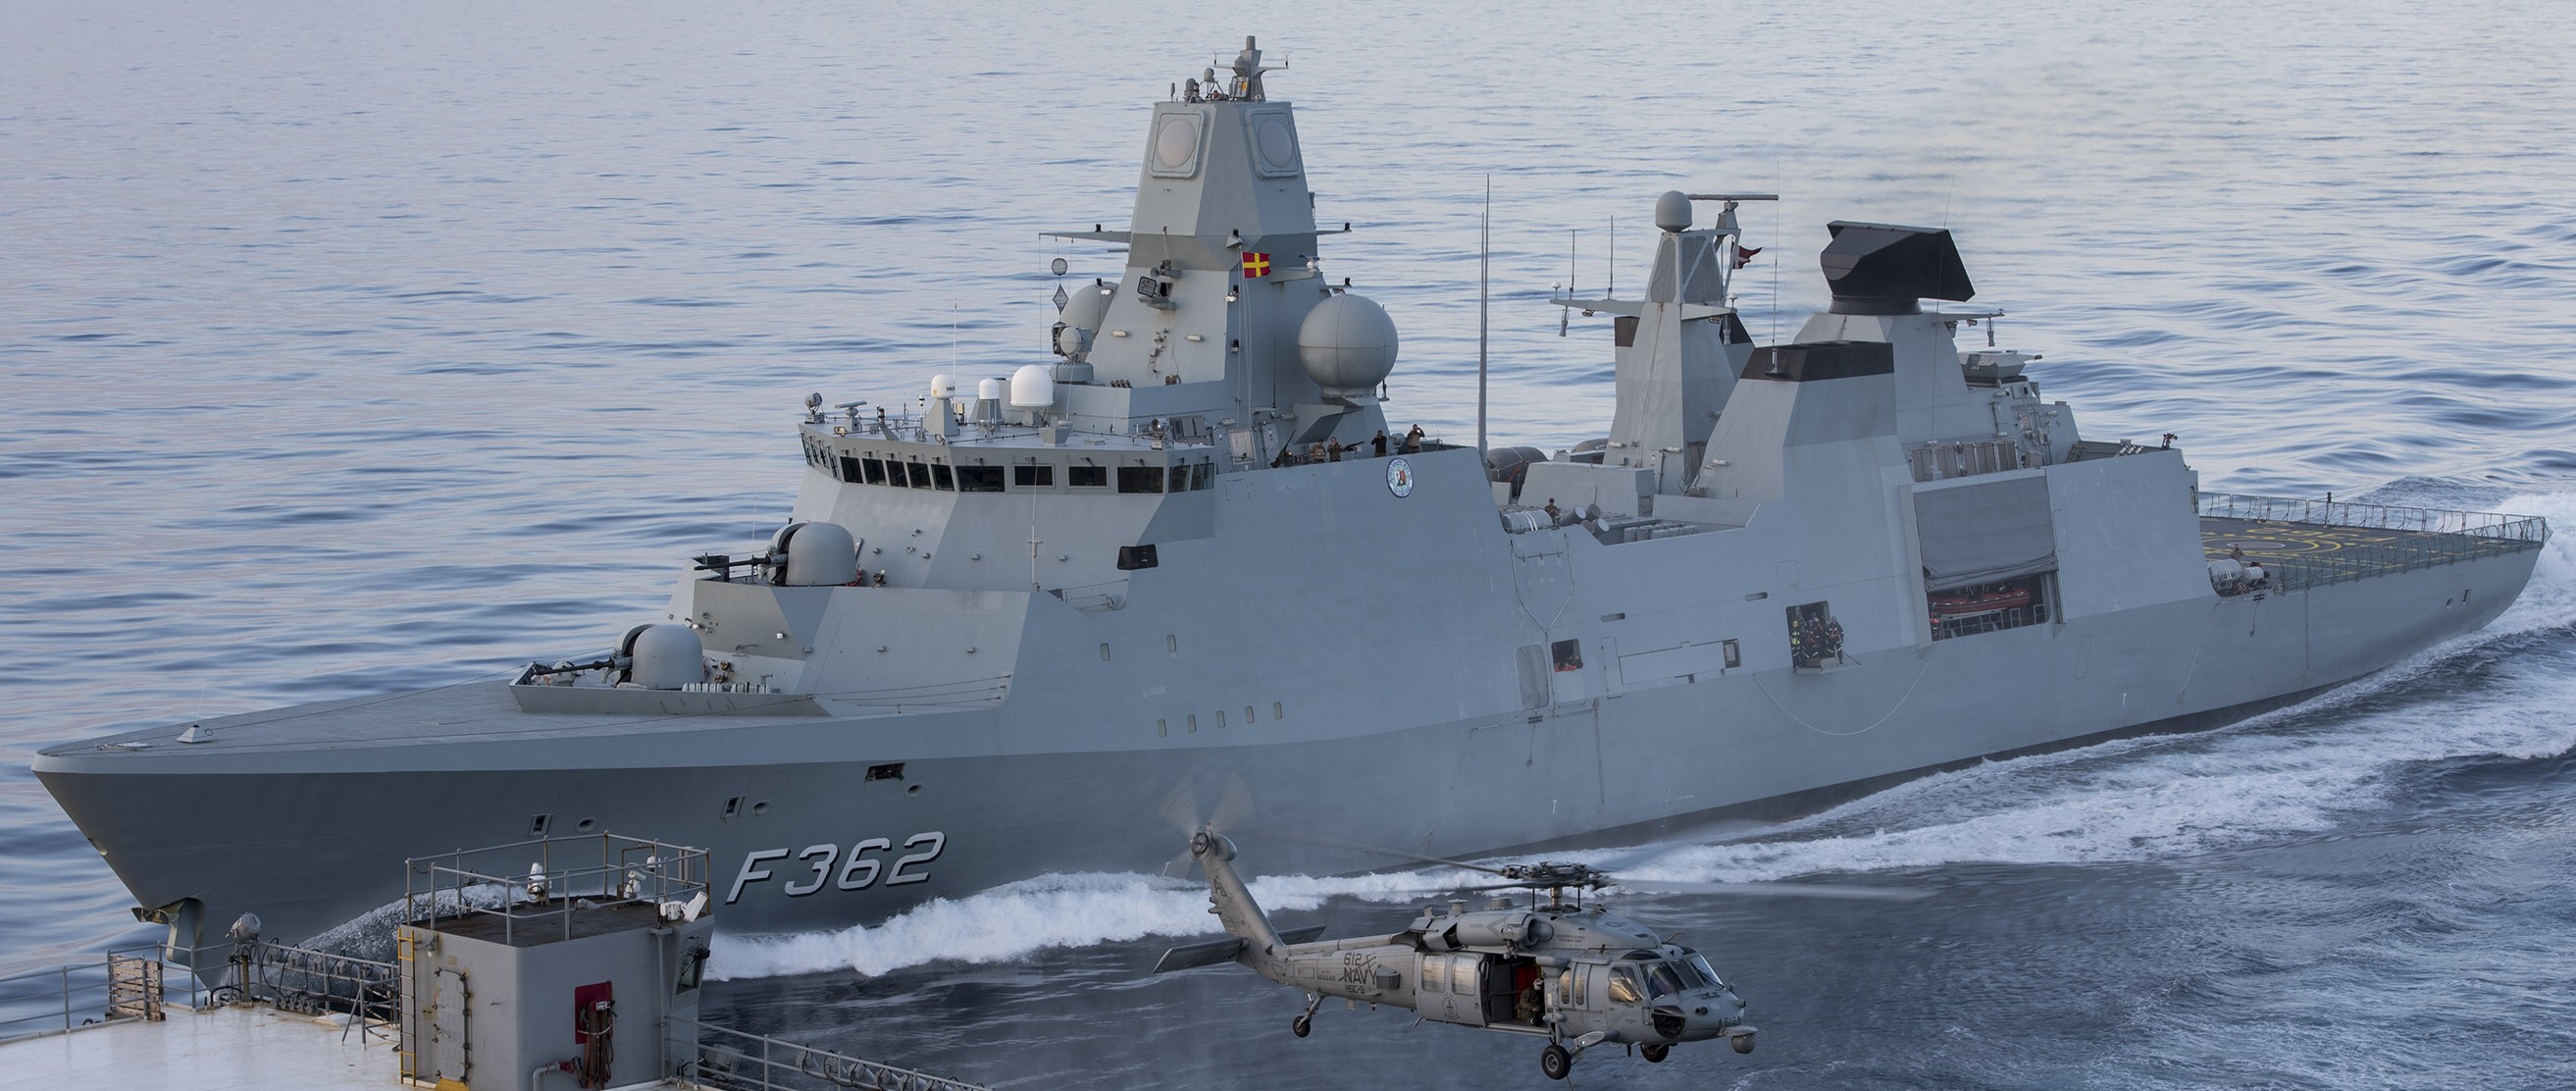 f-362 hdms peter willemoes iver huitfeldt class guided missile frigate ffg royal danish navy 10